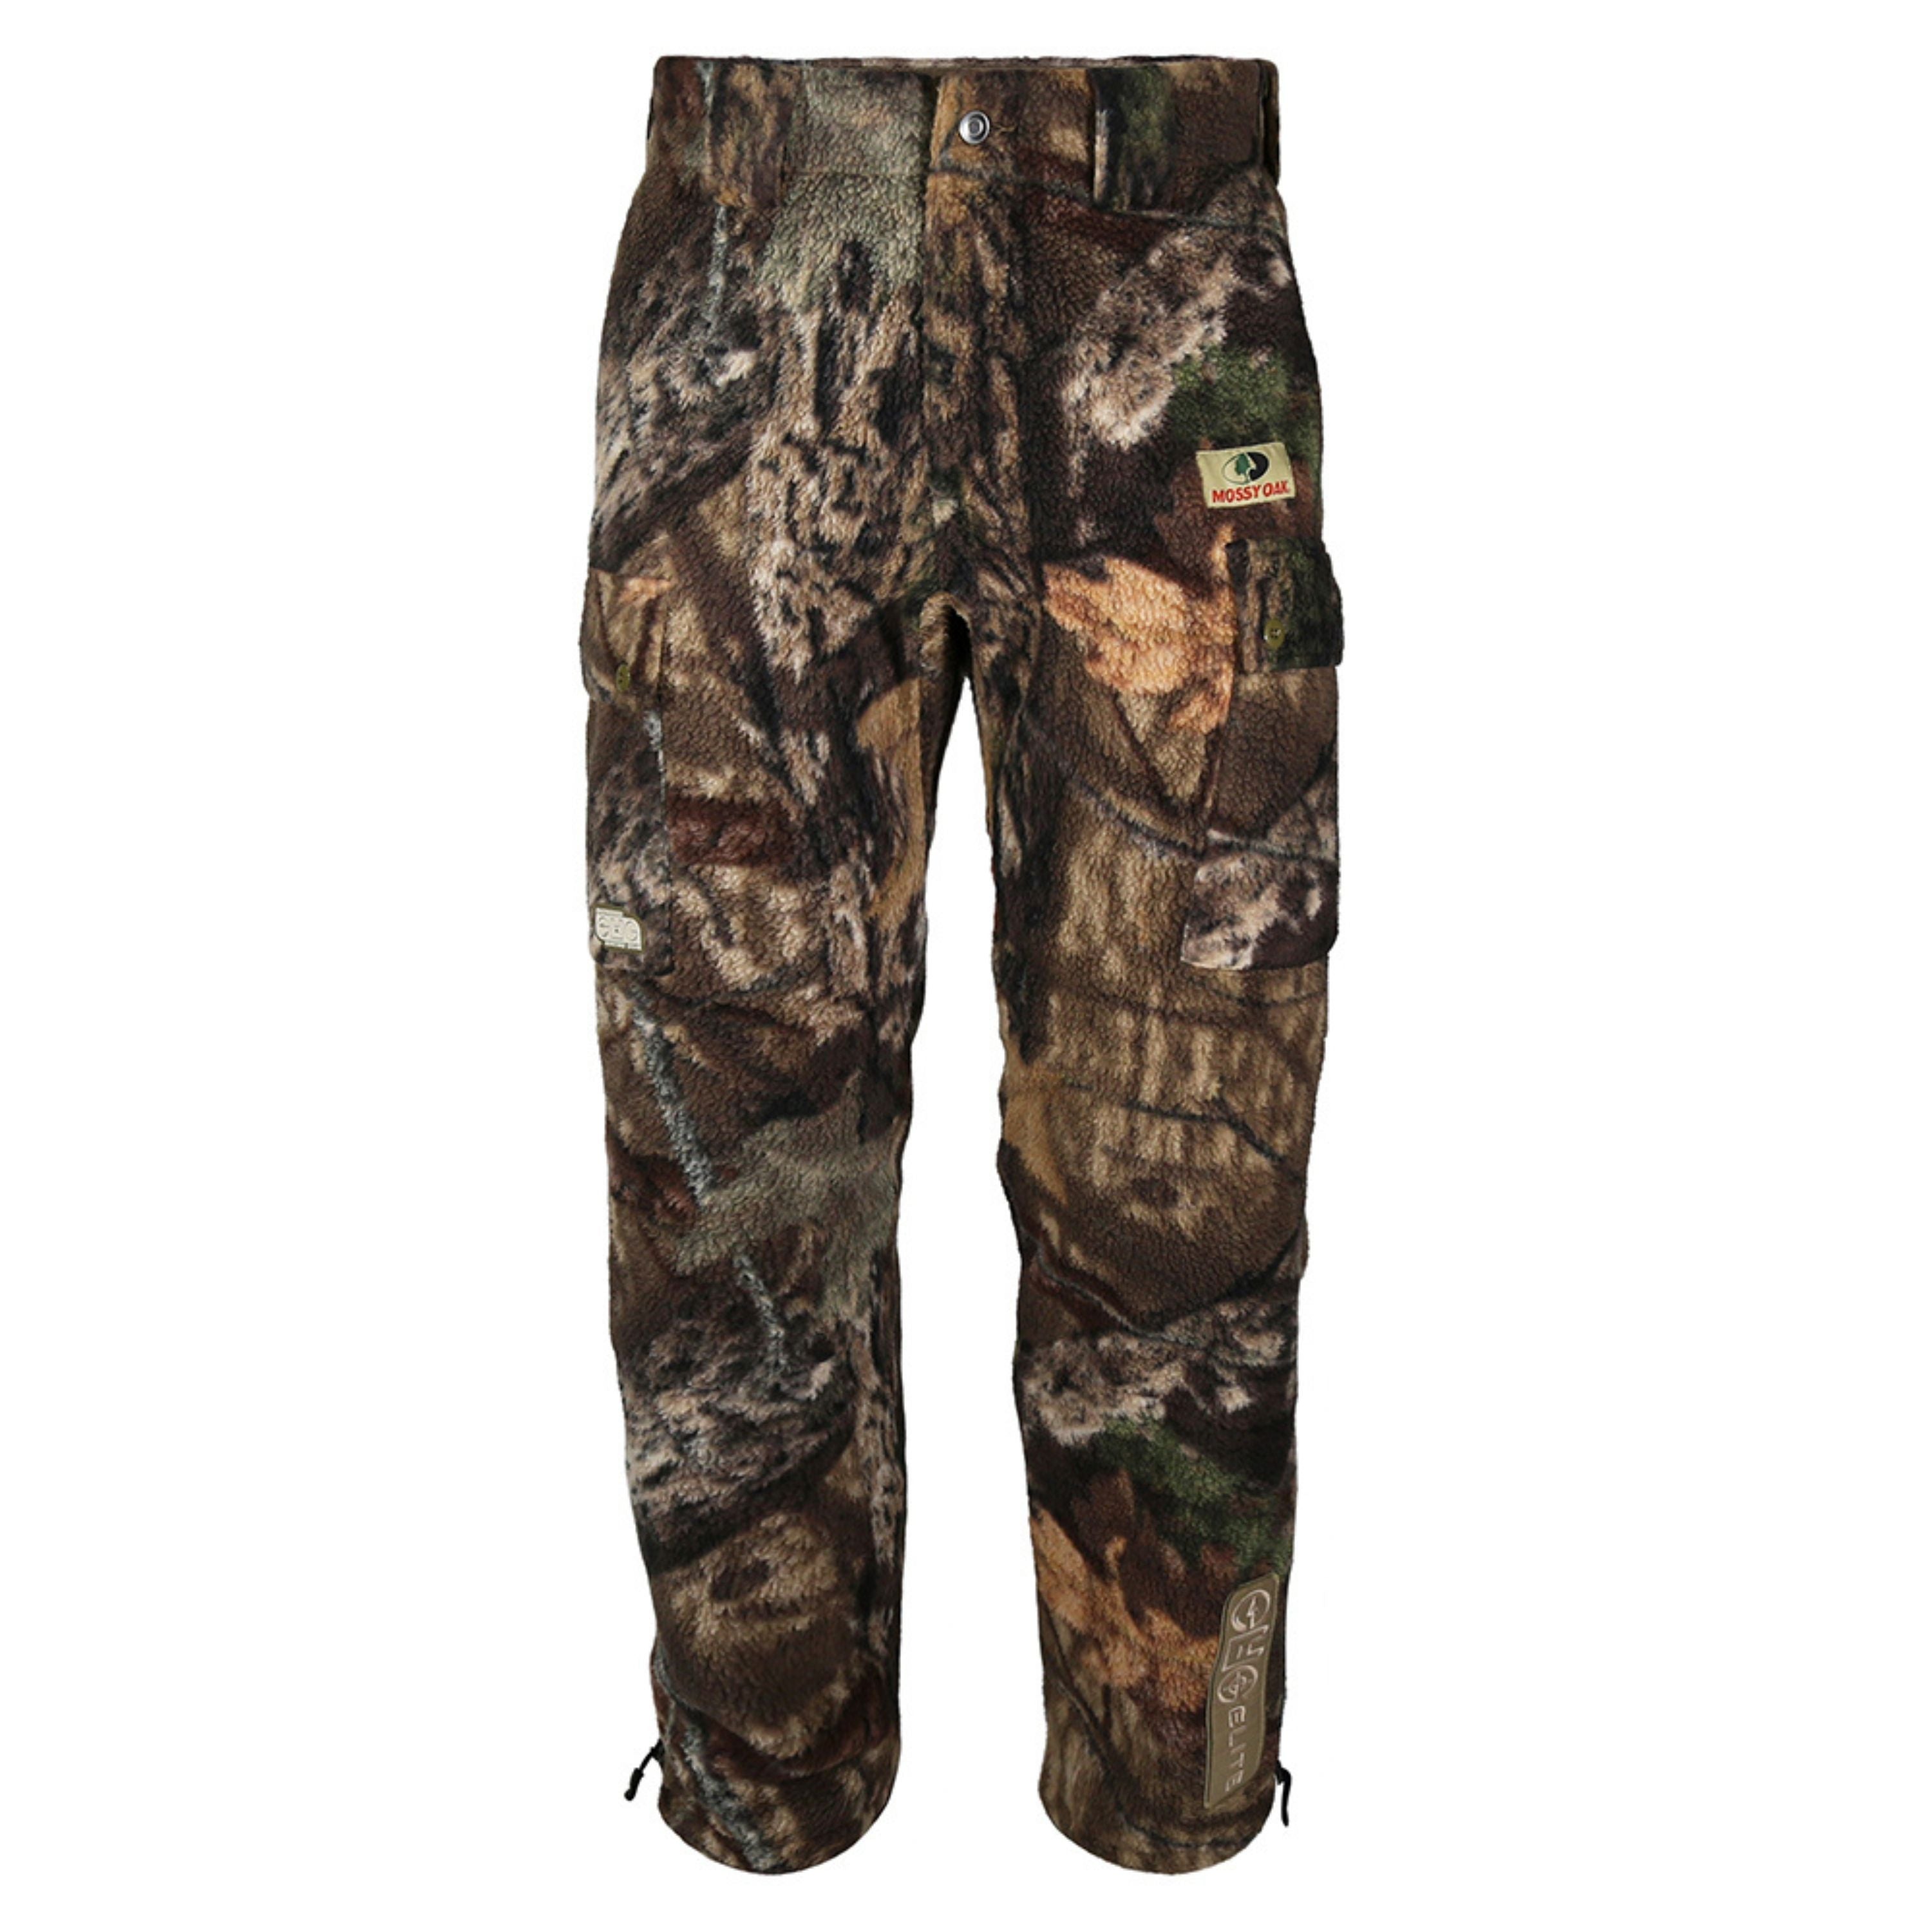 "Wasatch" Insulated pants - Men’s